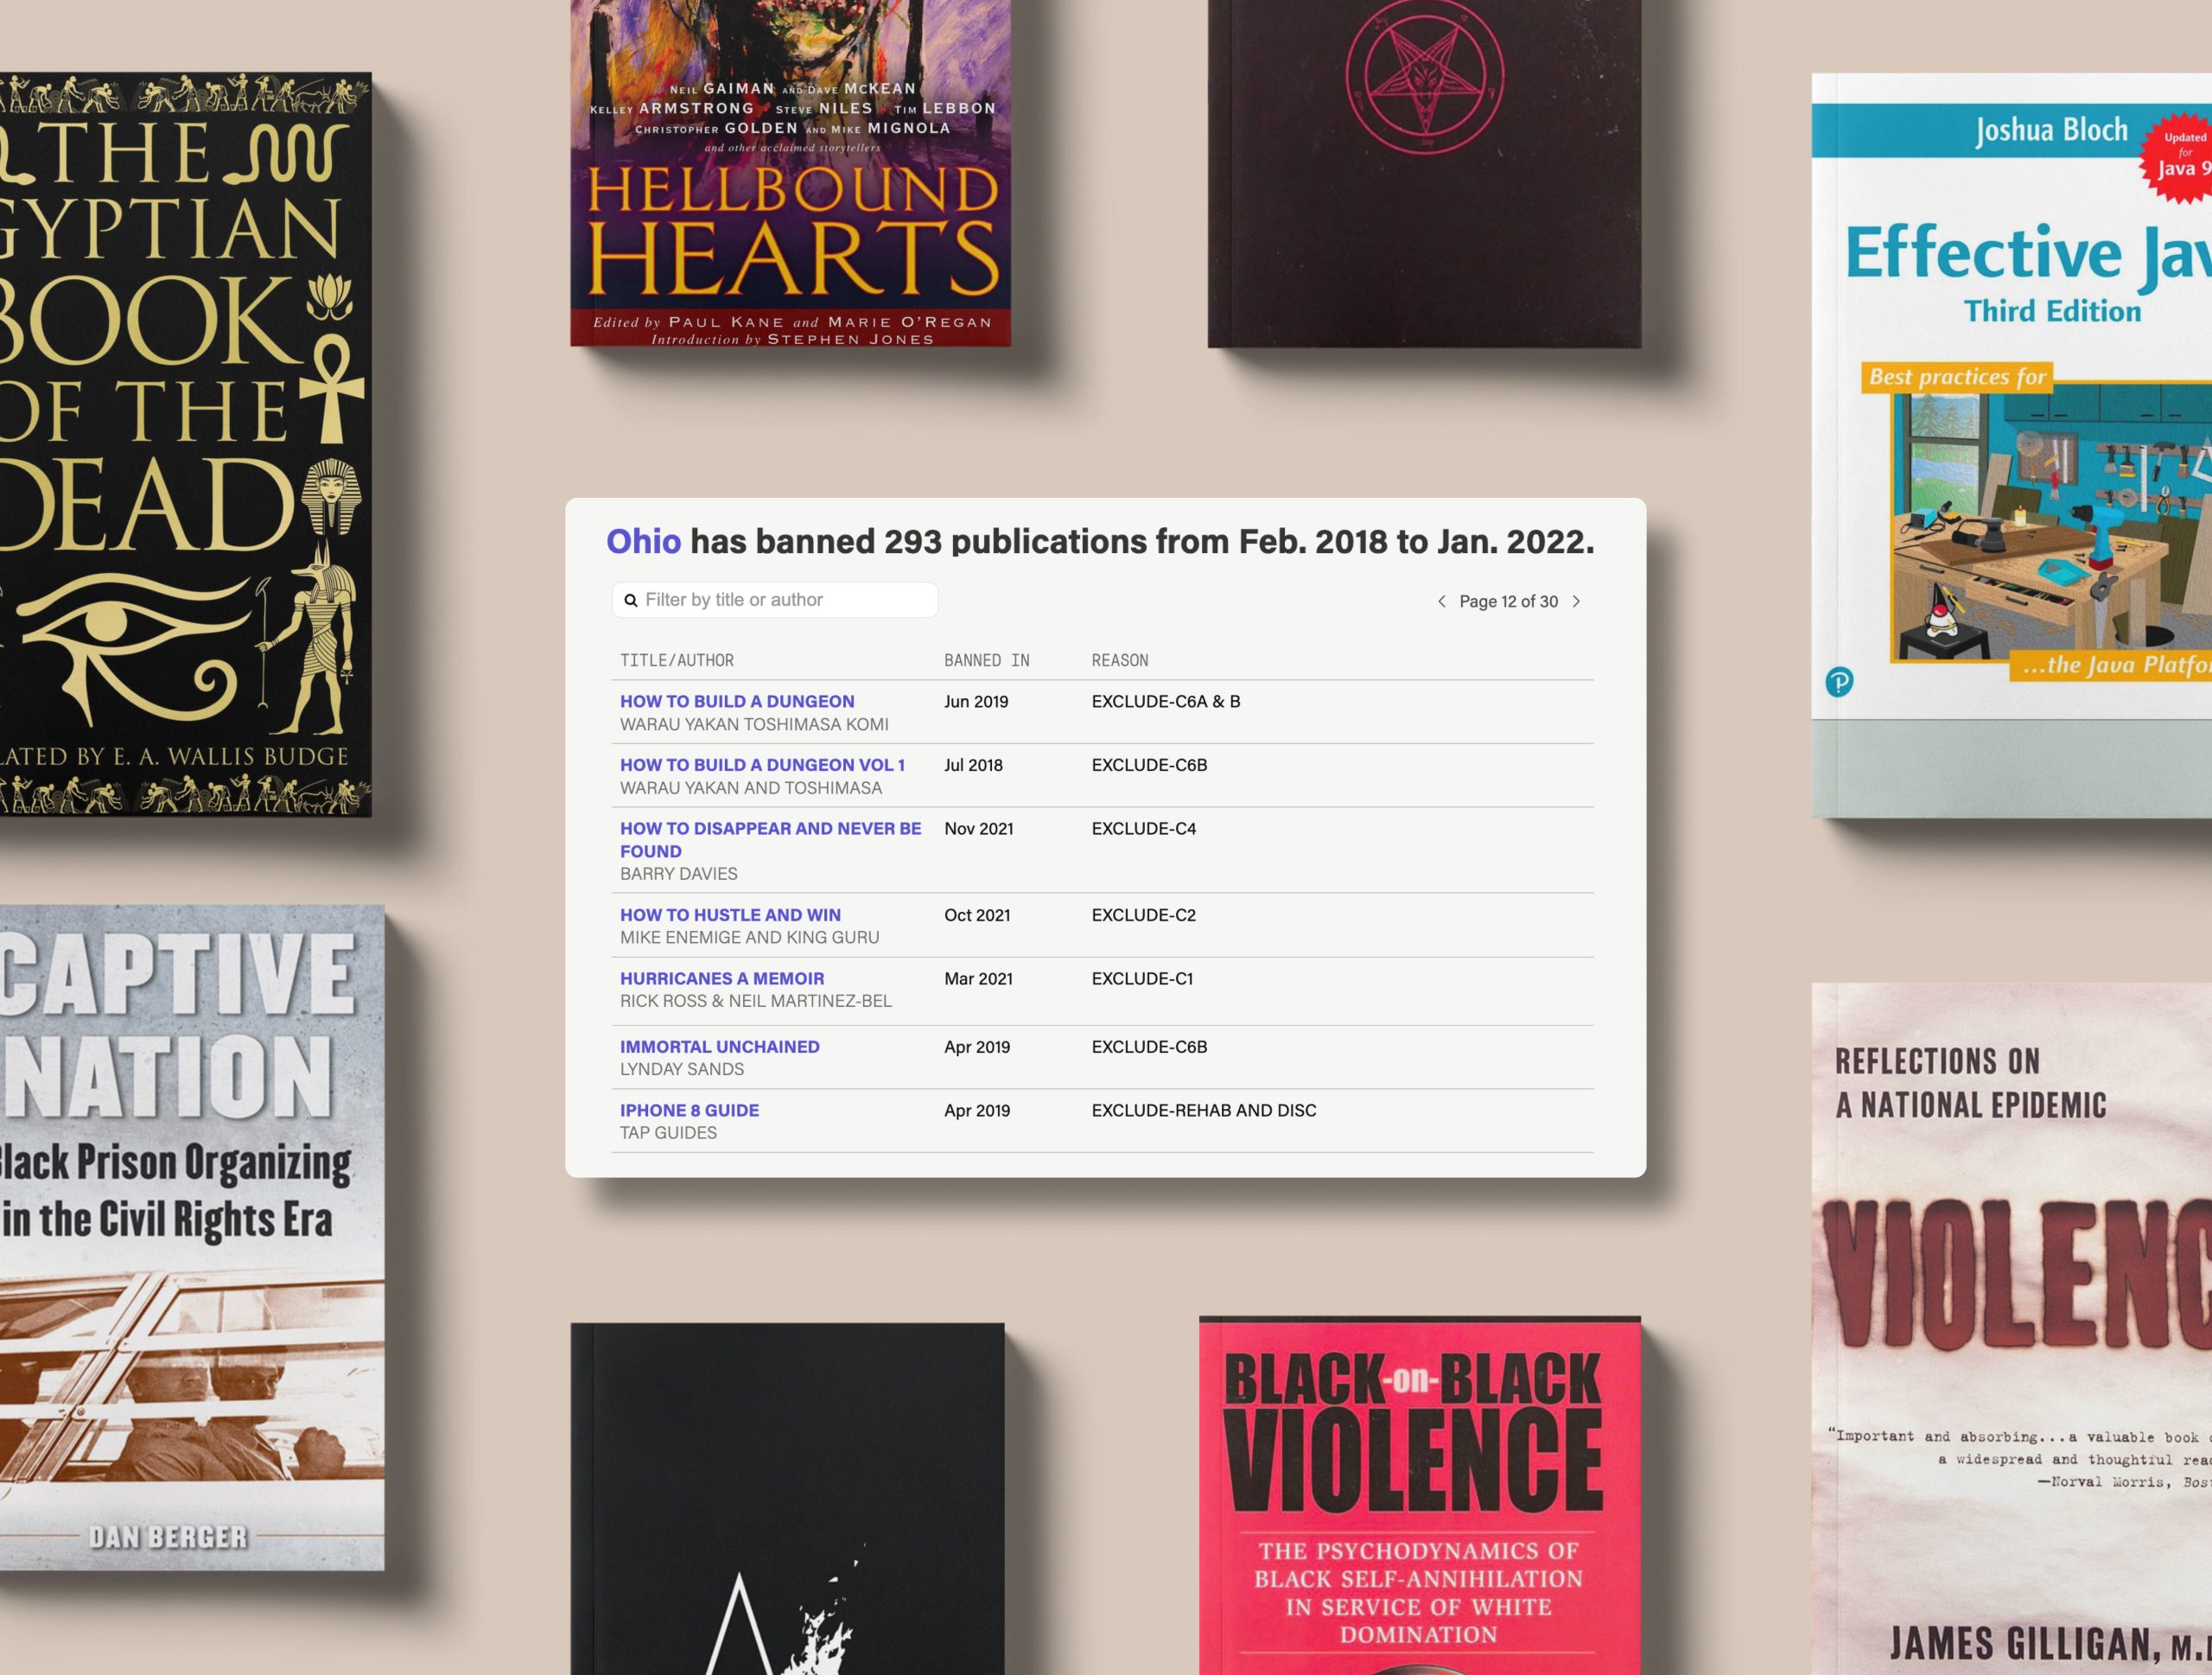 Eight cropped book covers with shadows behind them appear in a grid against a cream-colored background: “The Egyptian Book of the Dead,” “The Hellbound Heart,” “Captive Nation,” “Black on Black Violence,” “Violence: Reflections on a National Epidemic” and “Effective Java.” The center of the grid shows an image of a tool displaying which books are banned in Ohio prisons.